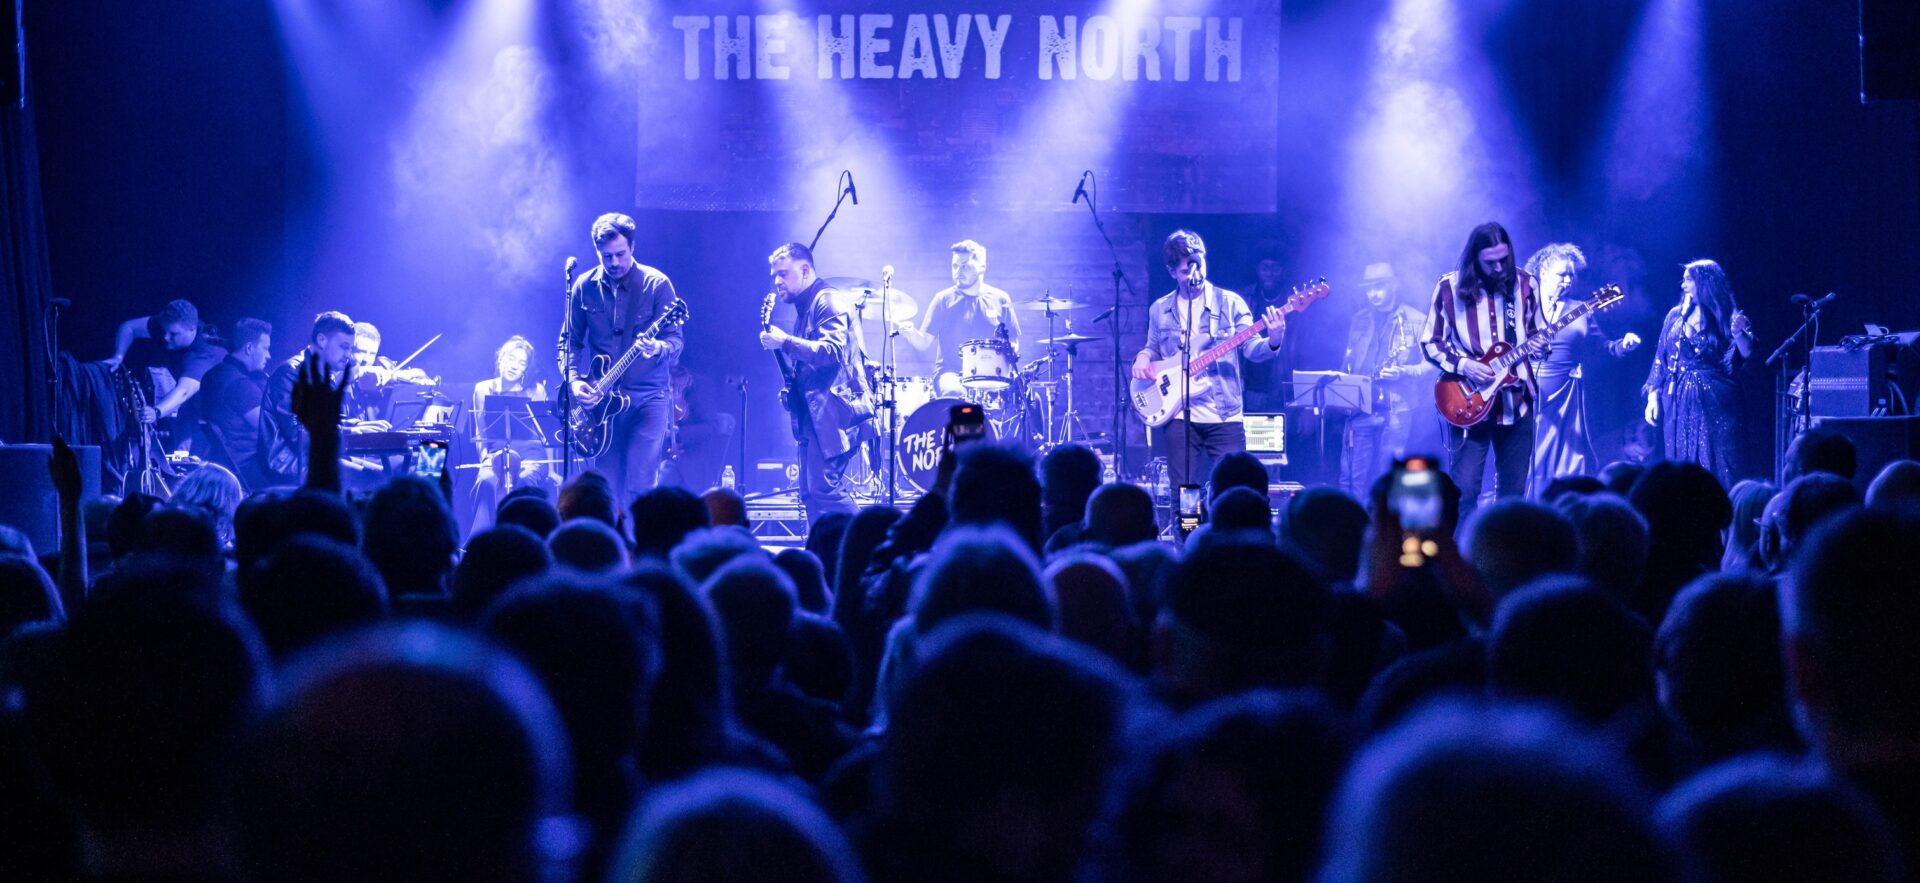 The Genie (Live) by The Heavy North: Review